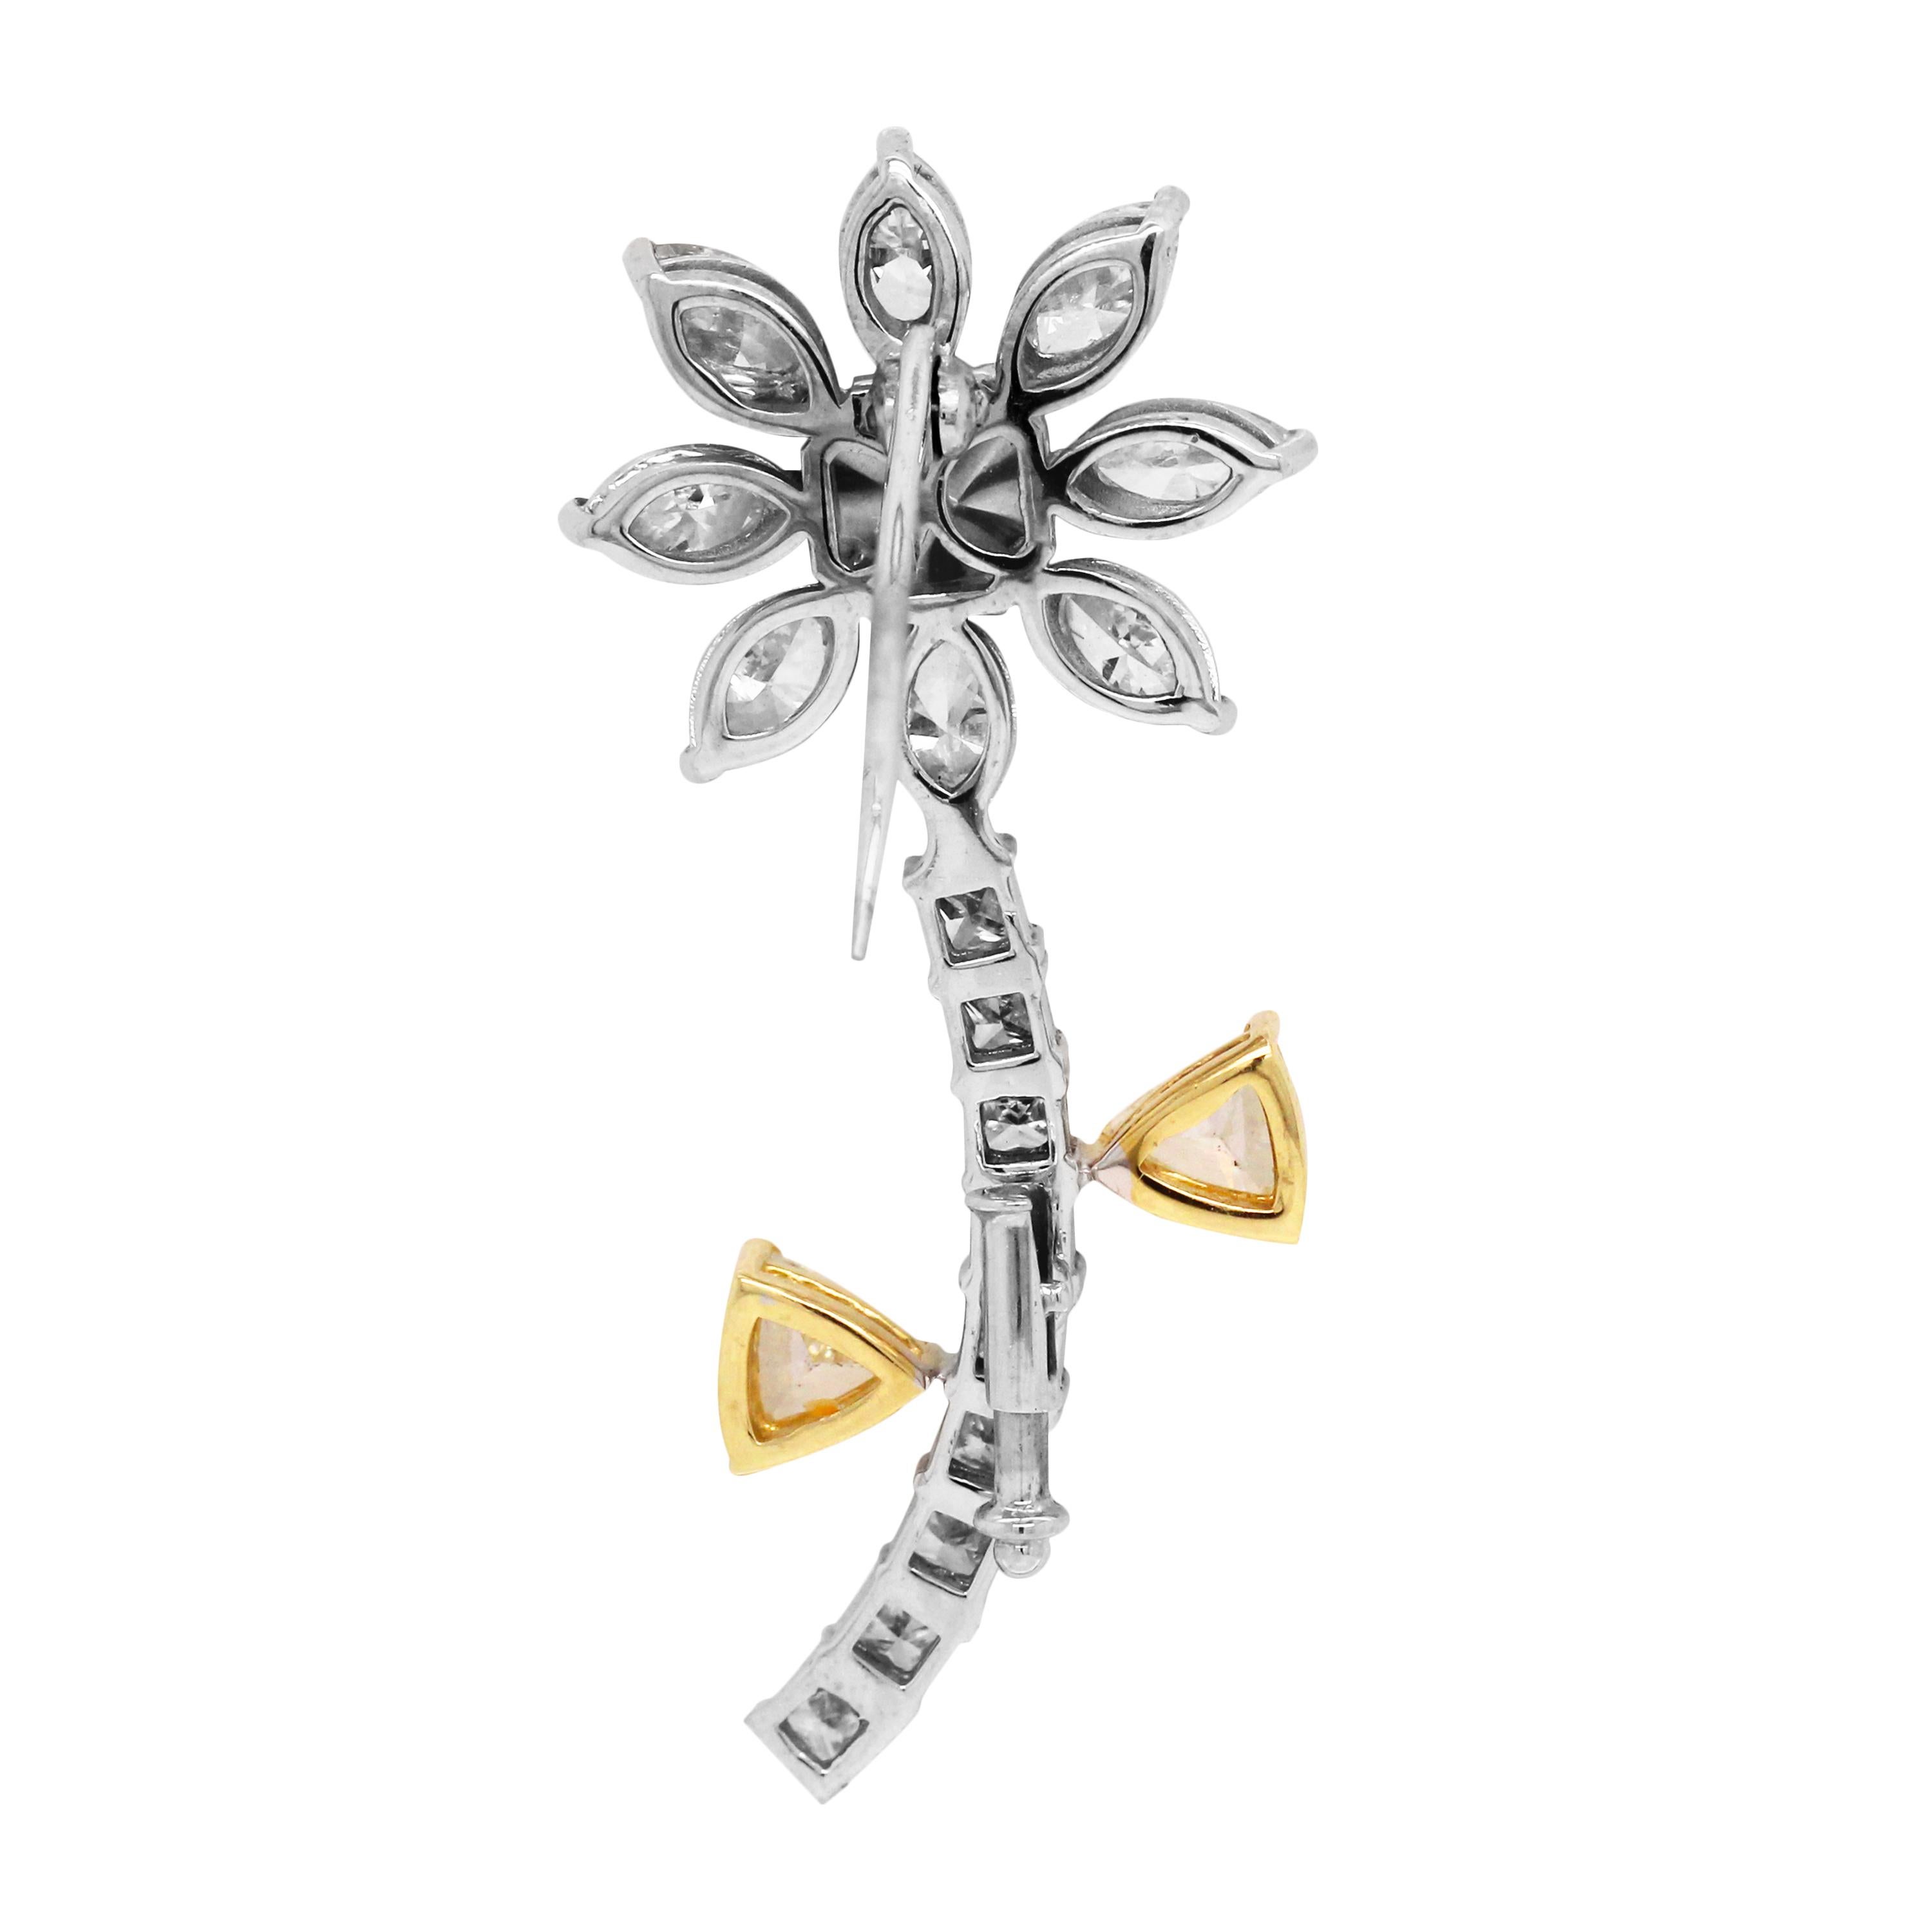 18k Yellow and White Diamond Palm Tree Brooch Pin with Fancy Cut Diamonds

This one-of-a-kind brooch features a cushion-cut yellow diamond center surrounded with marquise diamonds. Below are round diamonds set on the tree branch with two